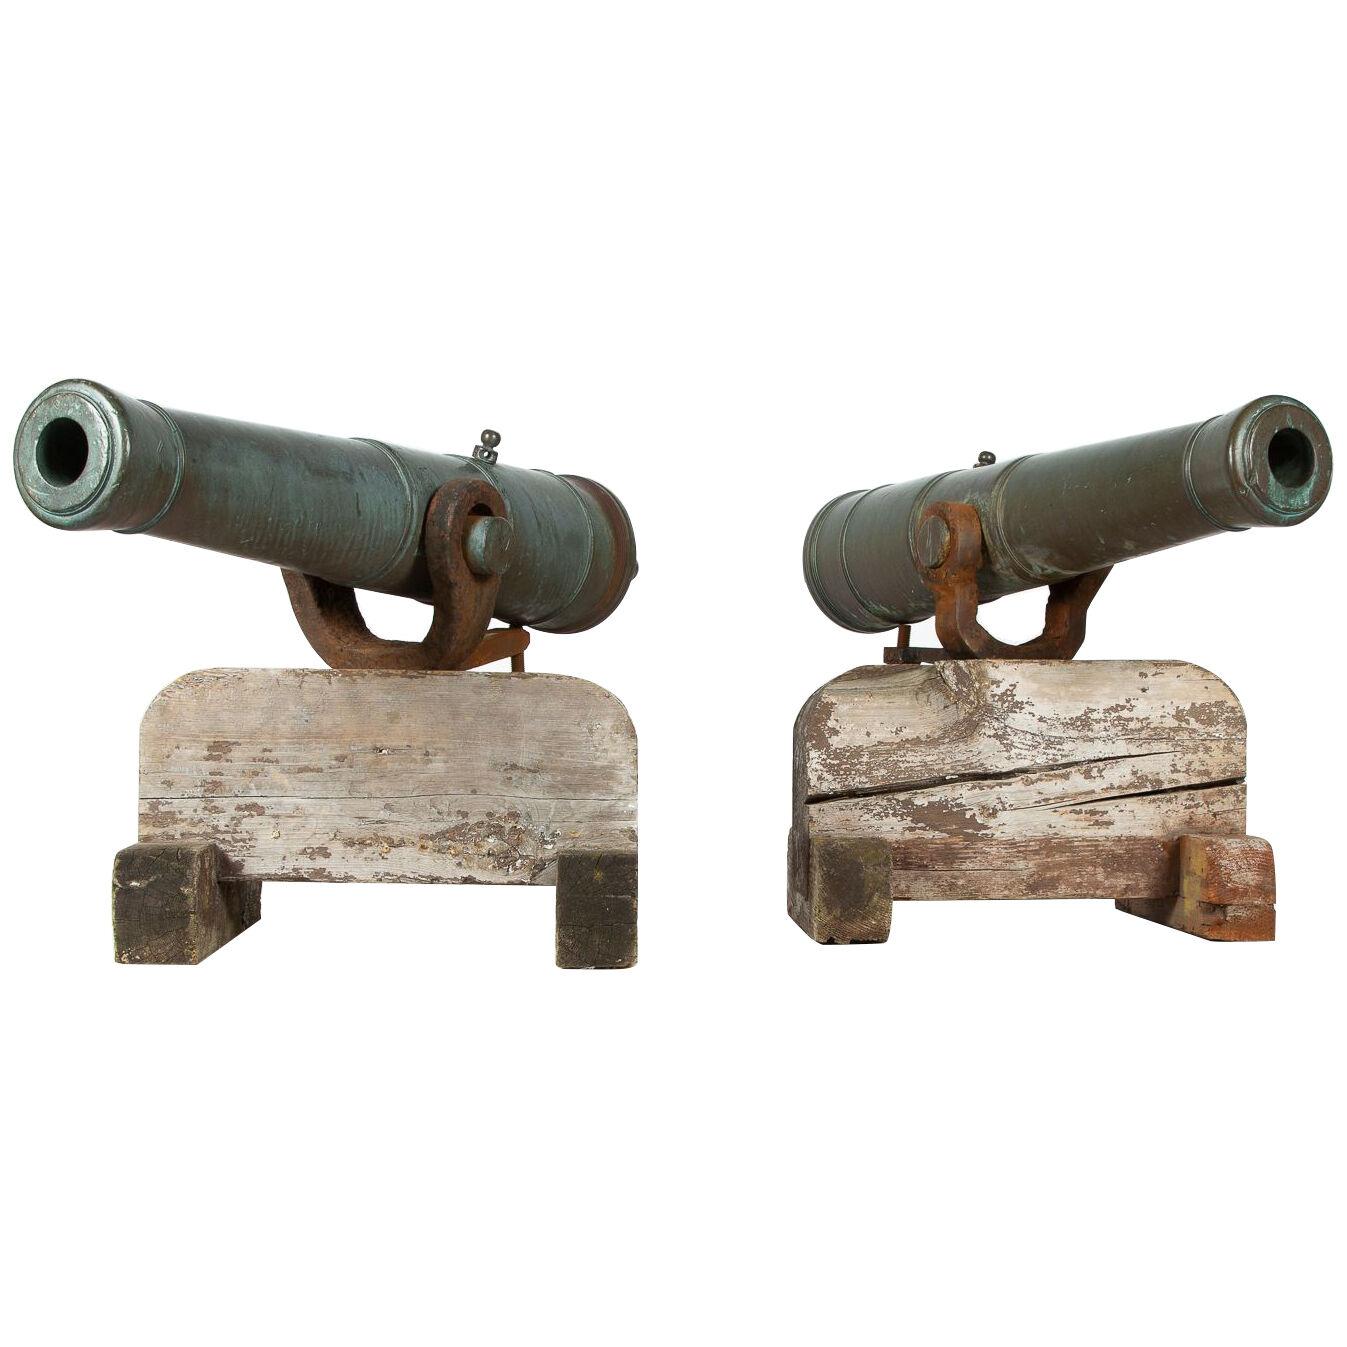  Danish bronze falconet one pounder cannons, by Gamst, circa 1808